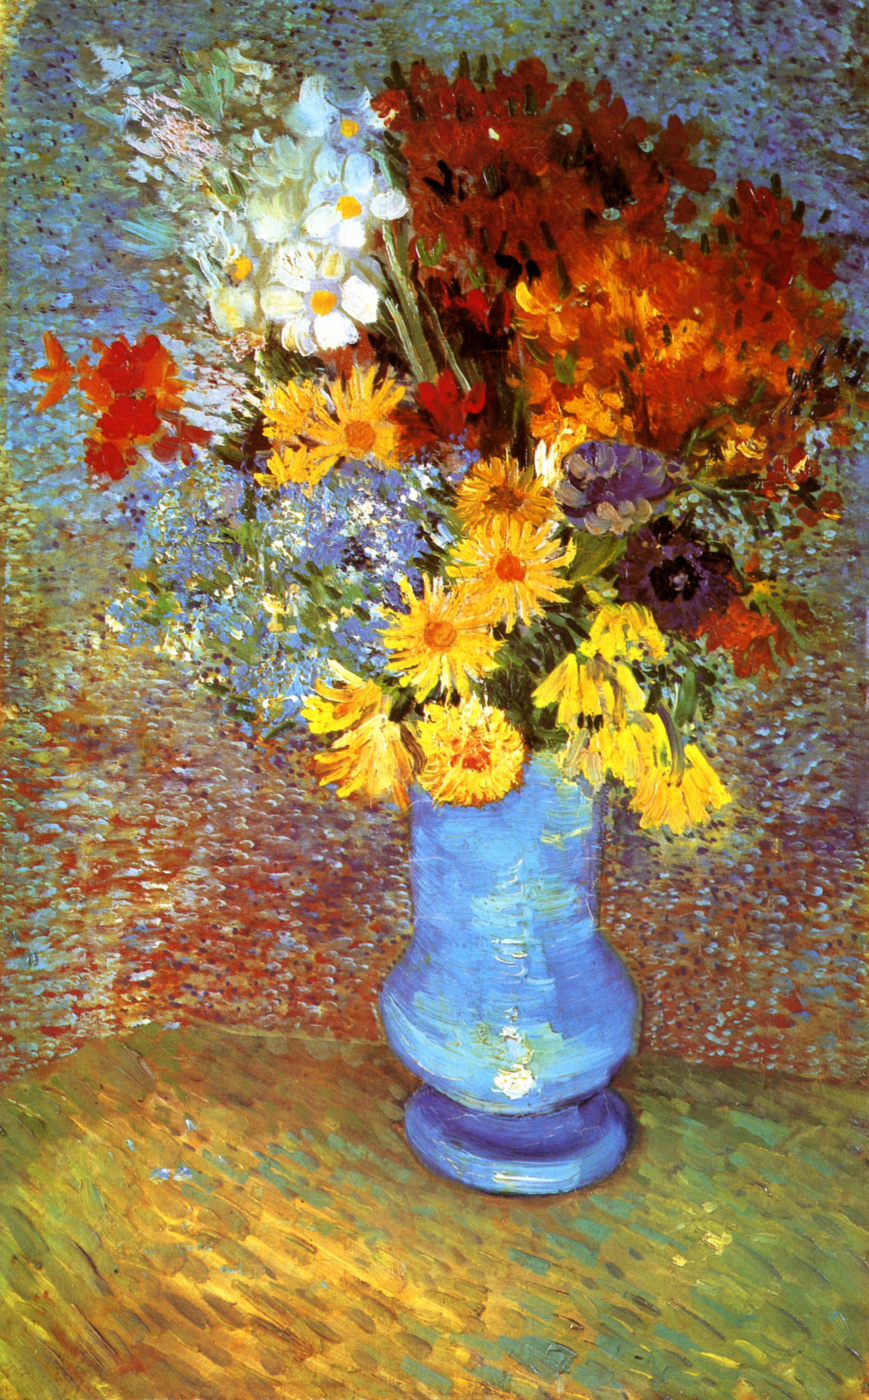 Vincent van Gogh. Vase with daisies and anemones